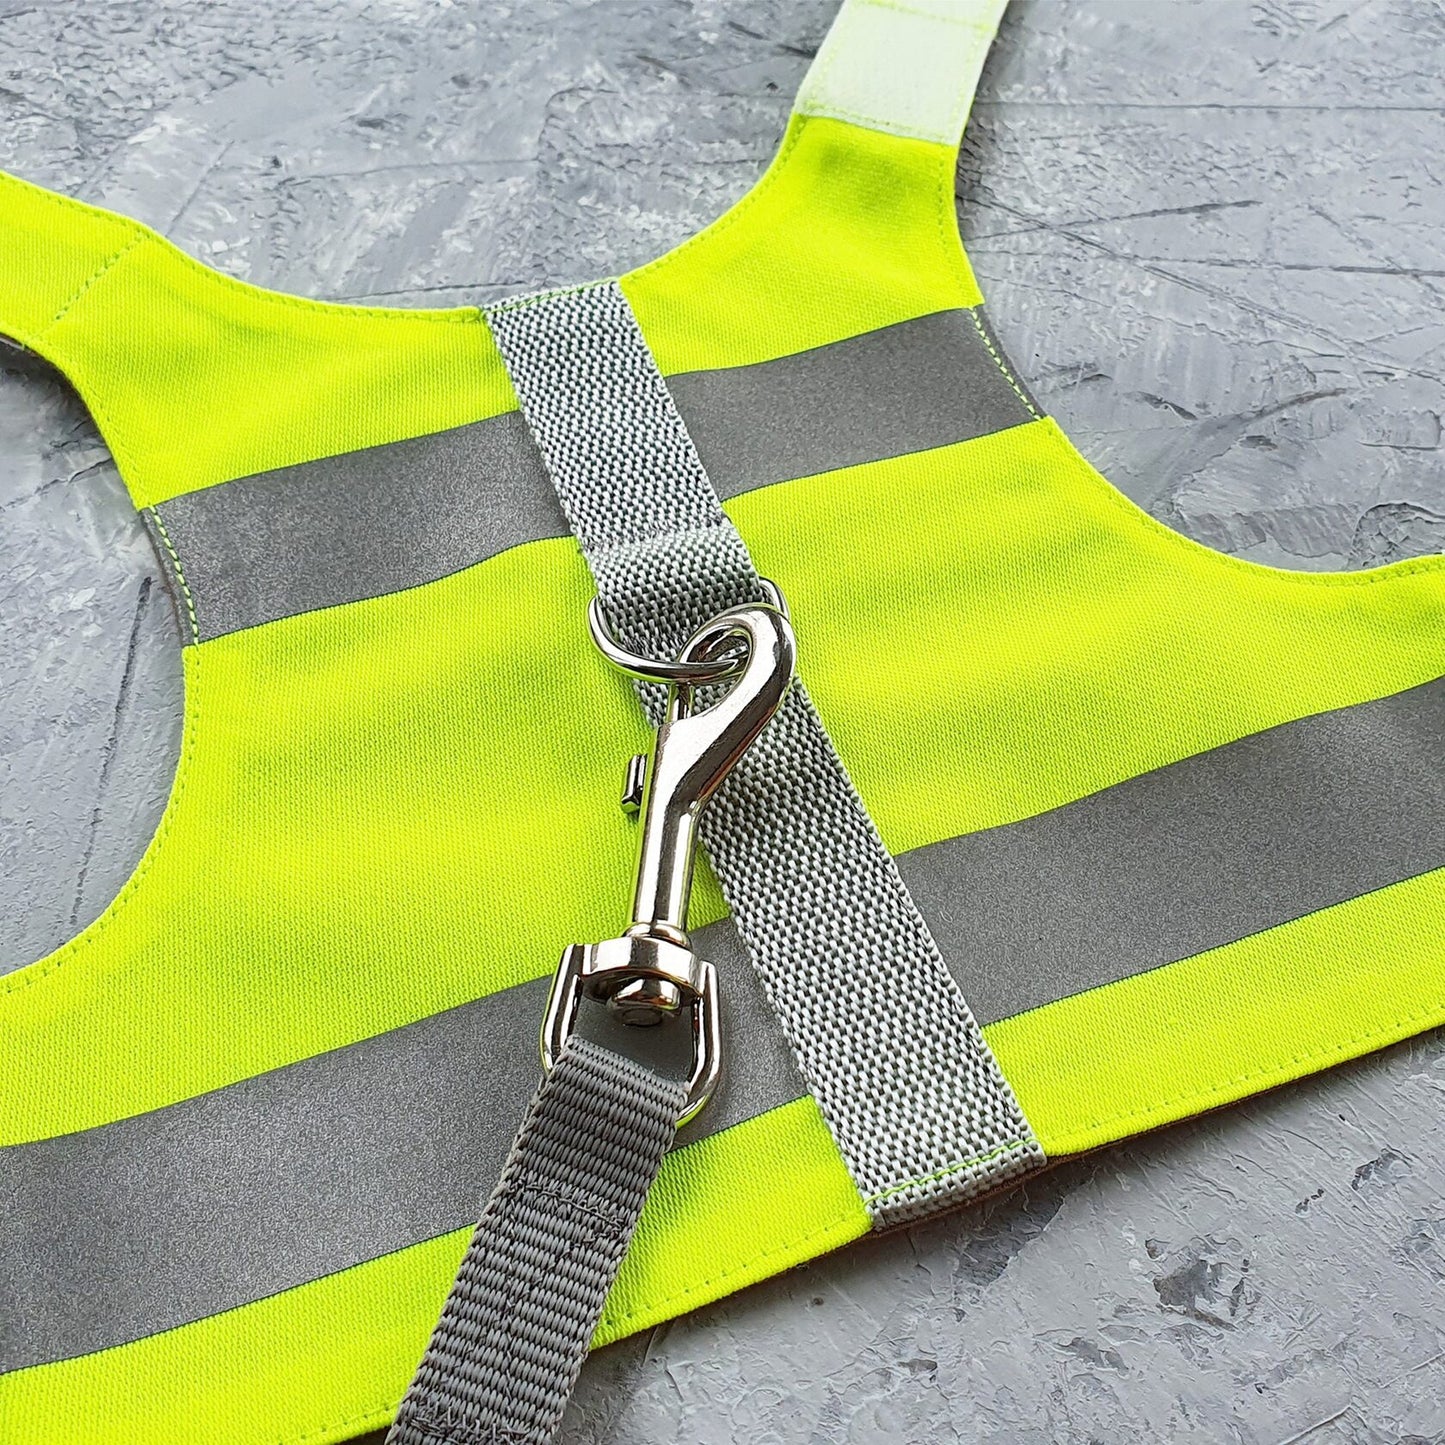 Starter kit for cat. Cotton High Visibility Neon Yellow harness with reflective stripes and 6 feet leash.